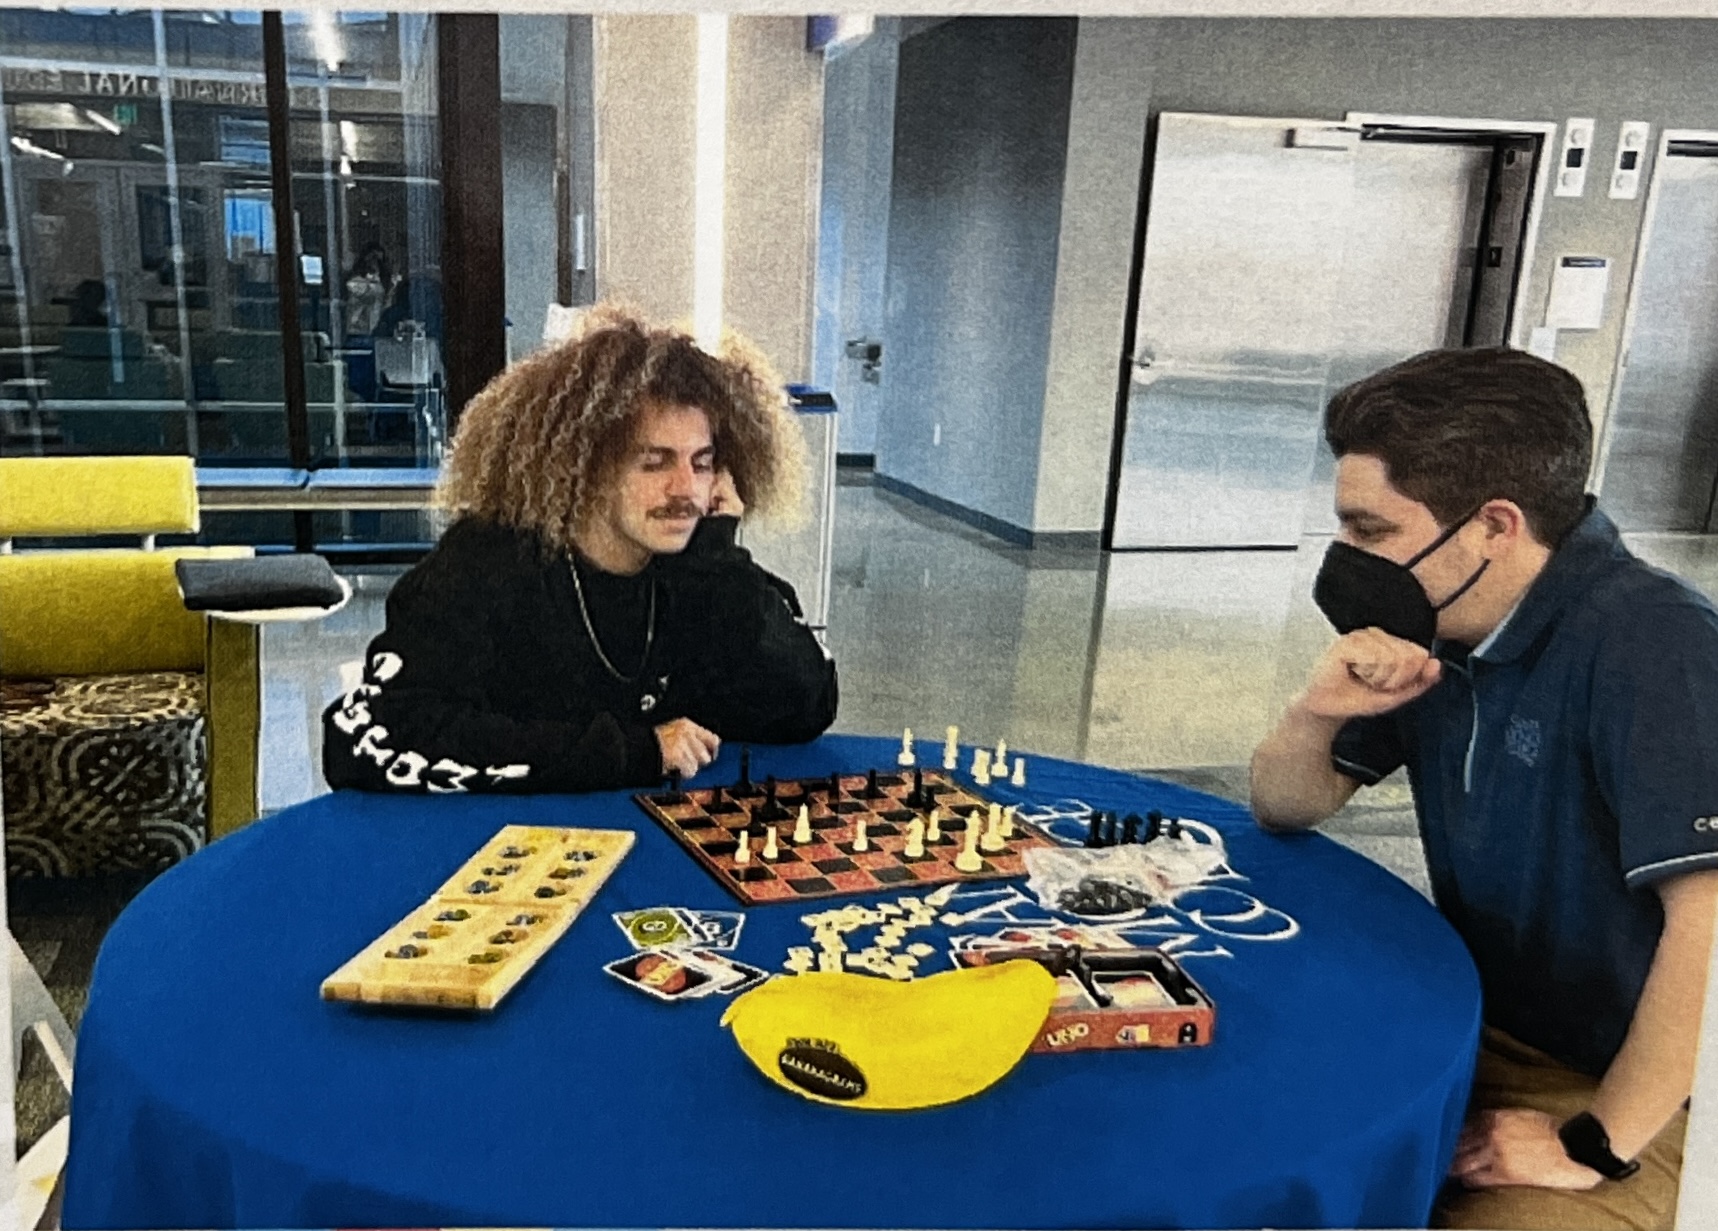 two people staring at a chess board and other board games on the table